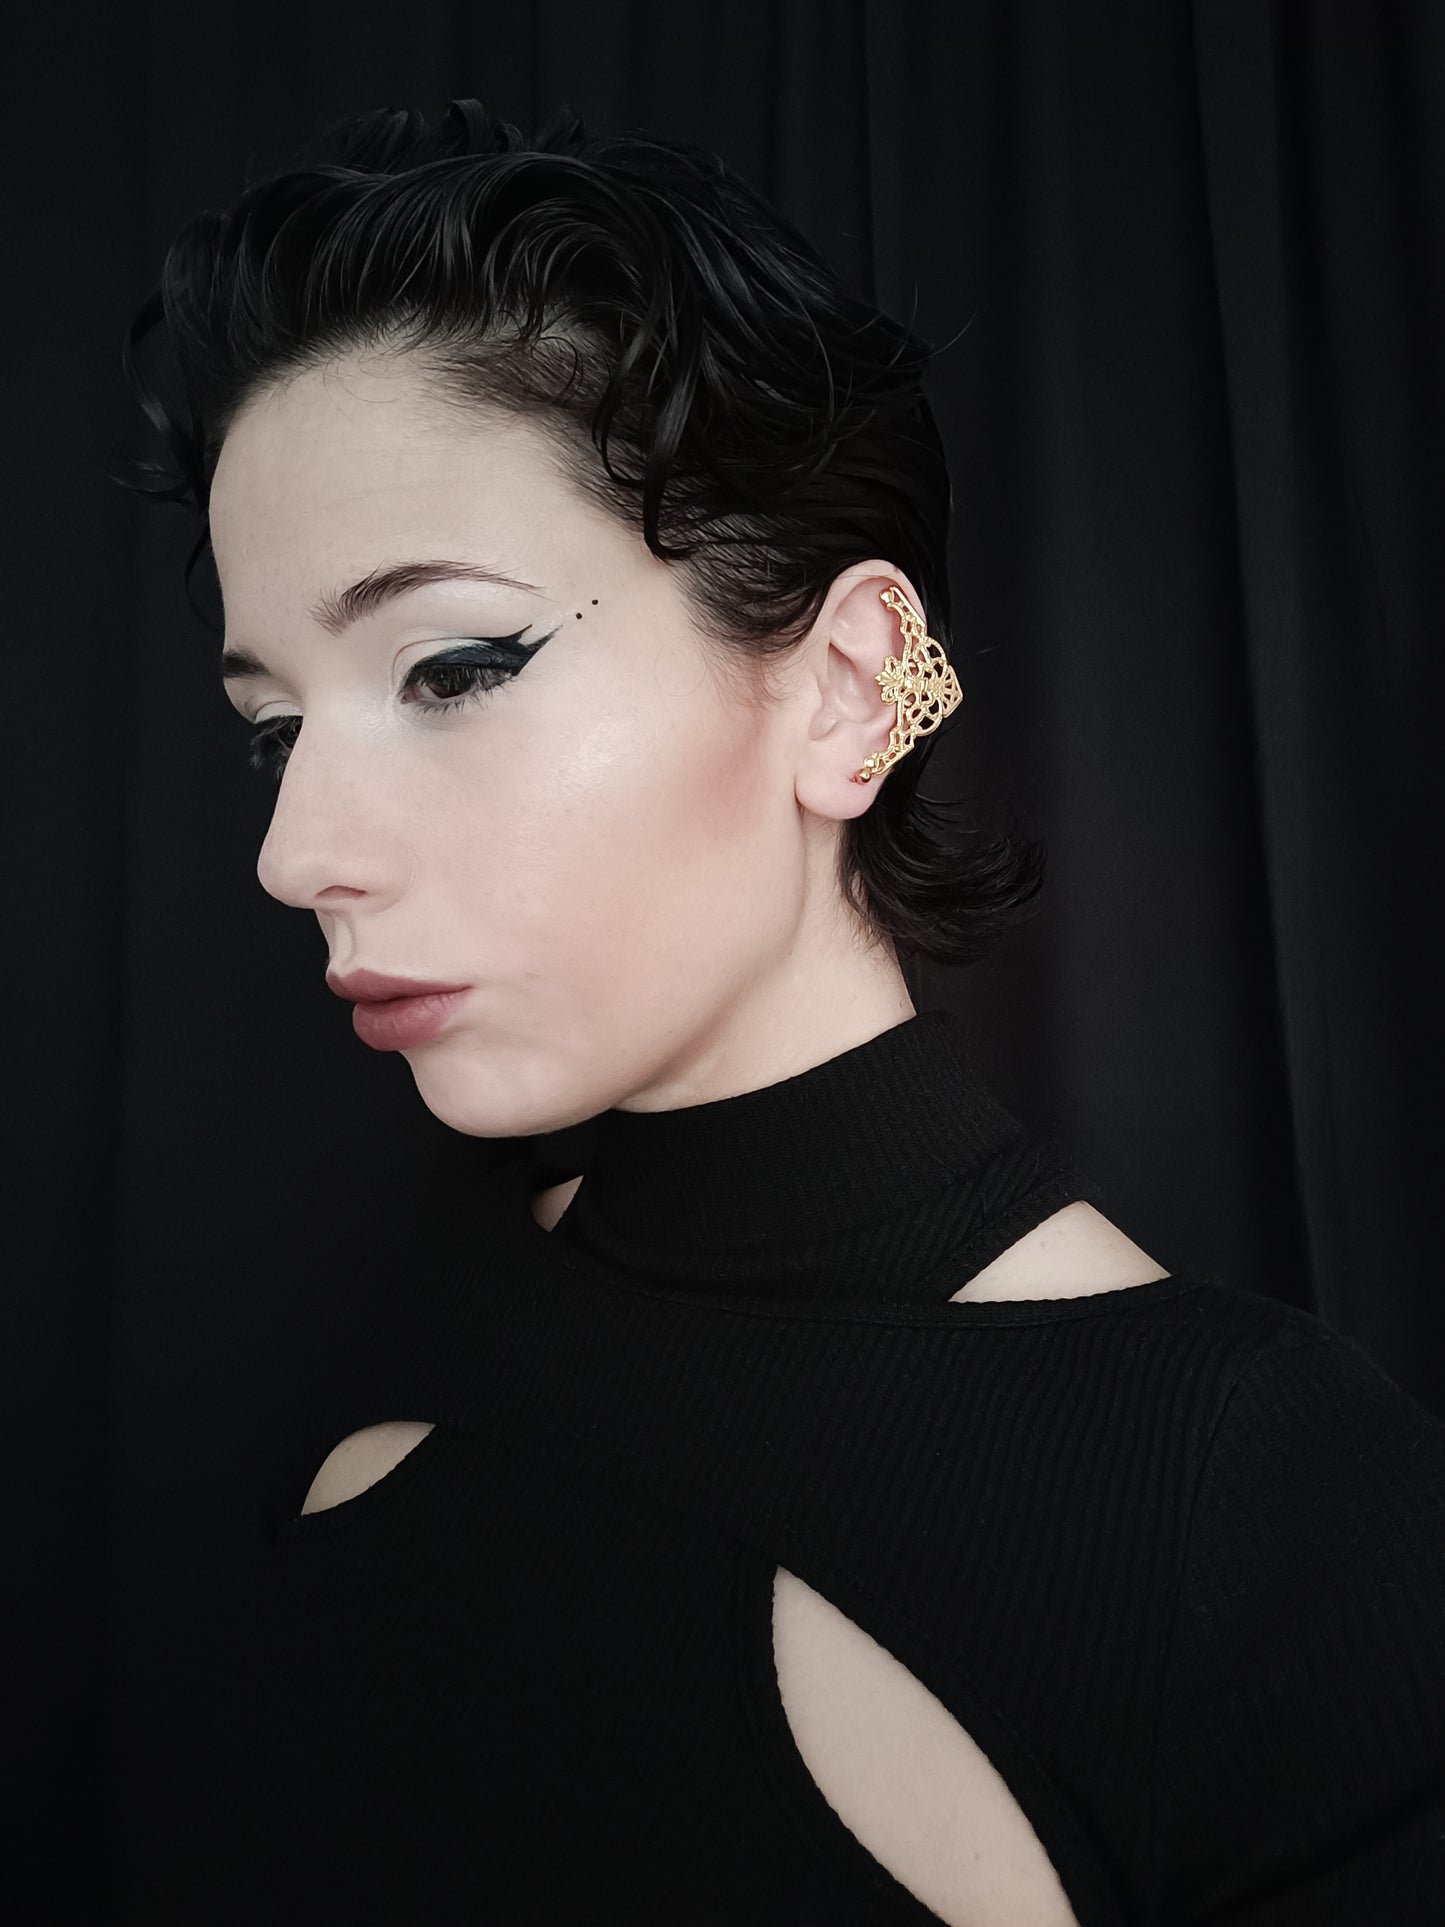 A profile view of a model wearing Myril Jewels' intricate gold cuff earrings, showcasing a neo-gothic design that complements the gothic and alternative style. The gold earrings feature an ornate filigree pattern that covers the ear with a touch of gothic-chic elegance, perfect for everyday wear or as a distinctive accent for festival jewels. Their elaborate craftsmanship captures the essence of Halloween jewelry, aligning with the whimsigoth and witchcore aesthetics